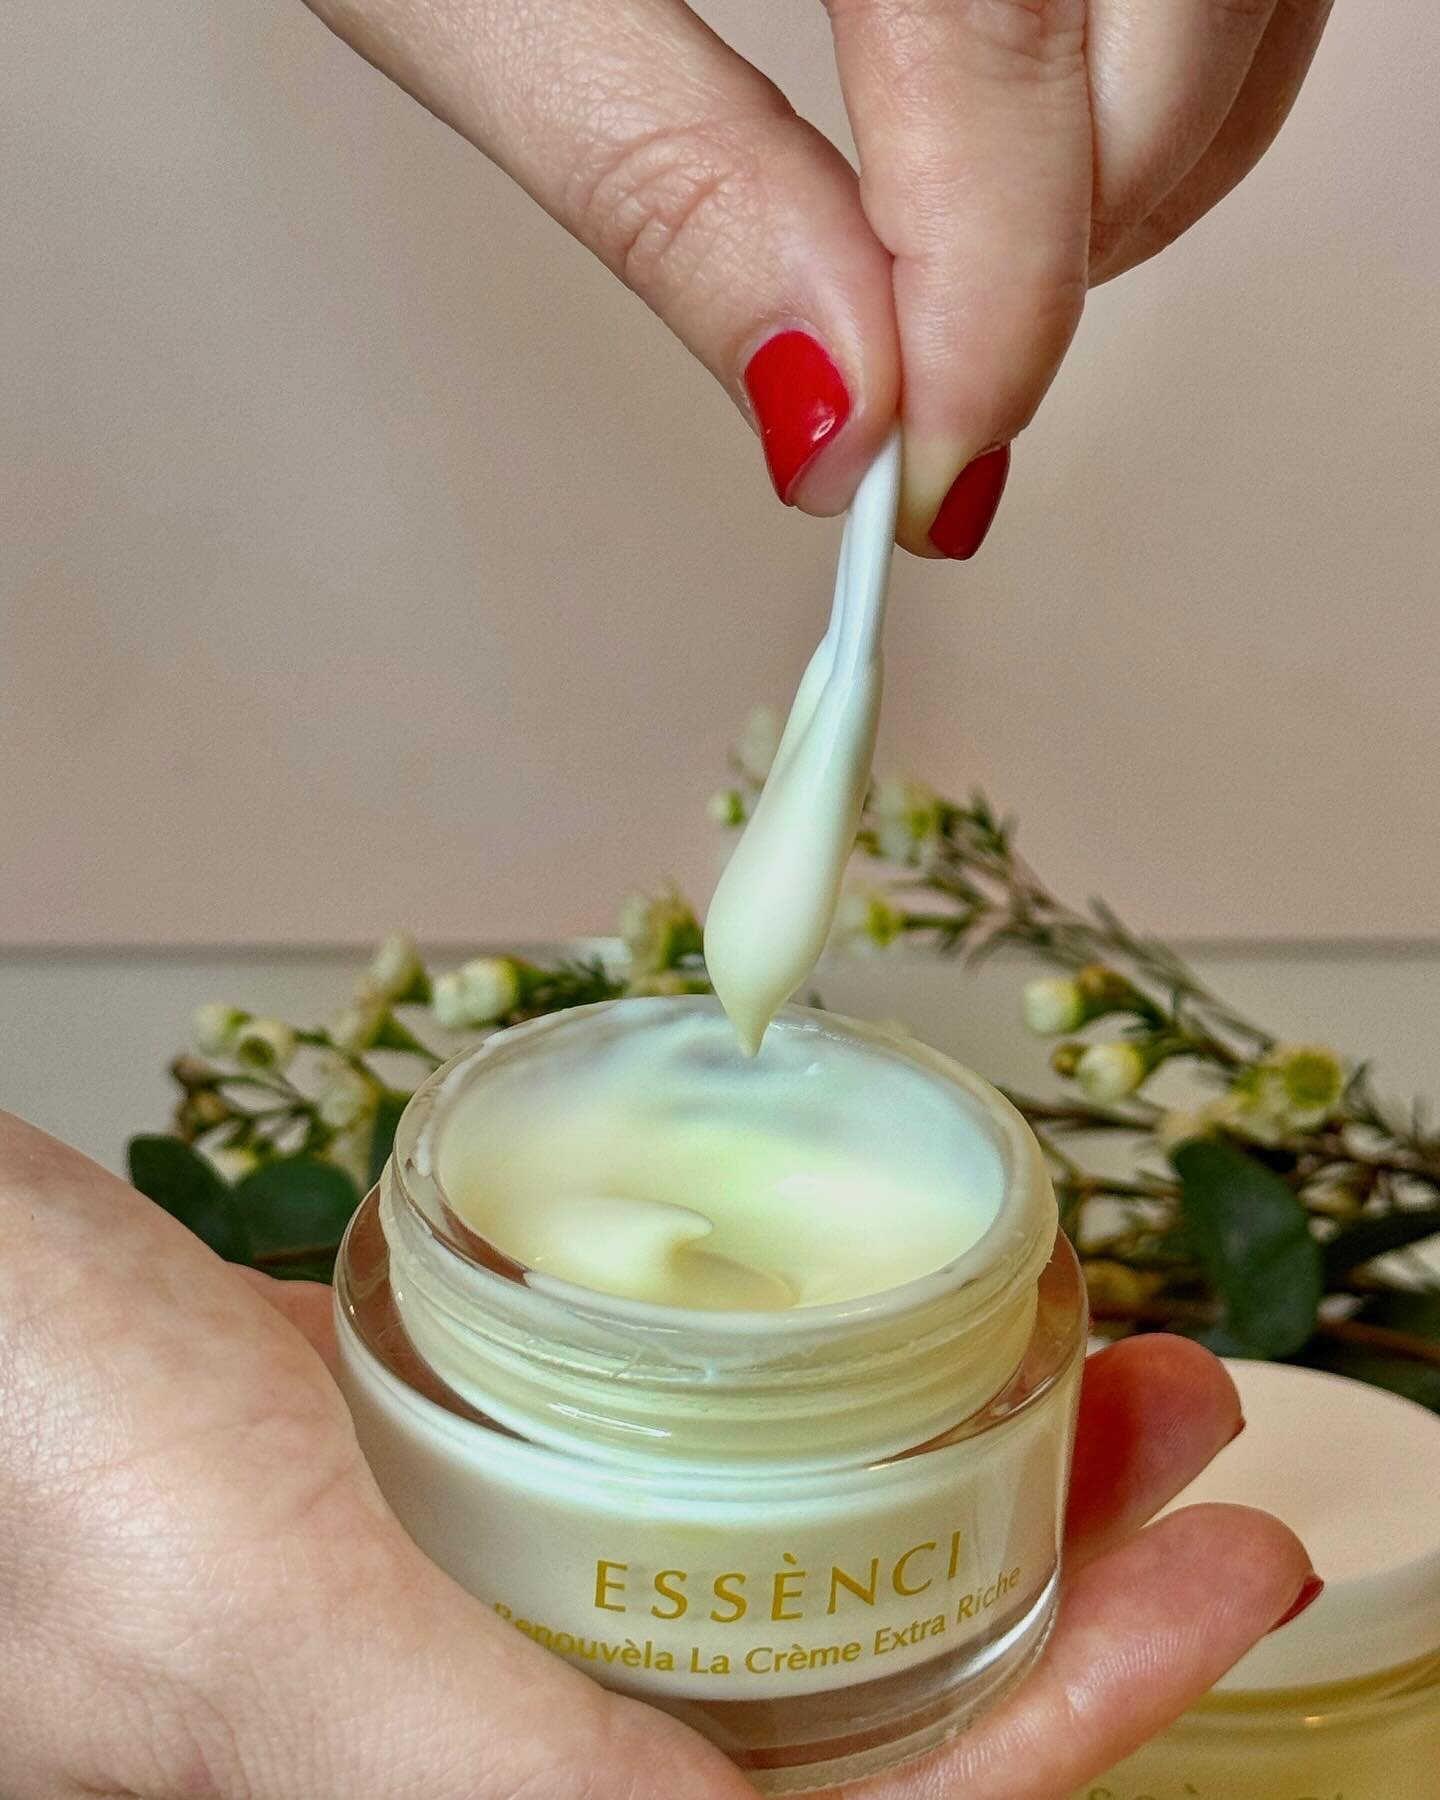 Check out our organic super creamy Renouv&egrave;la La Cr&egrave;me Extra Riche! It&rsquo;s aromatherapeutic and absorbs easily into the skin to deliver the necessary hydration needed to maintain your Ess&egrave;nci glow. Perfect year around- after t